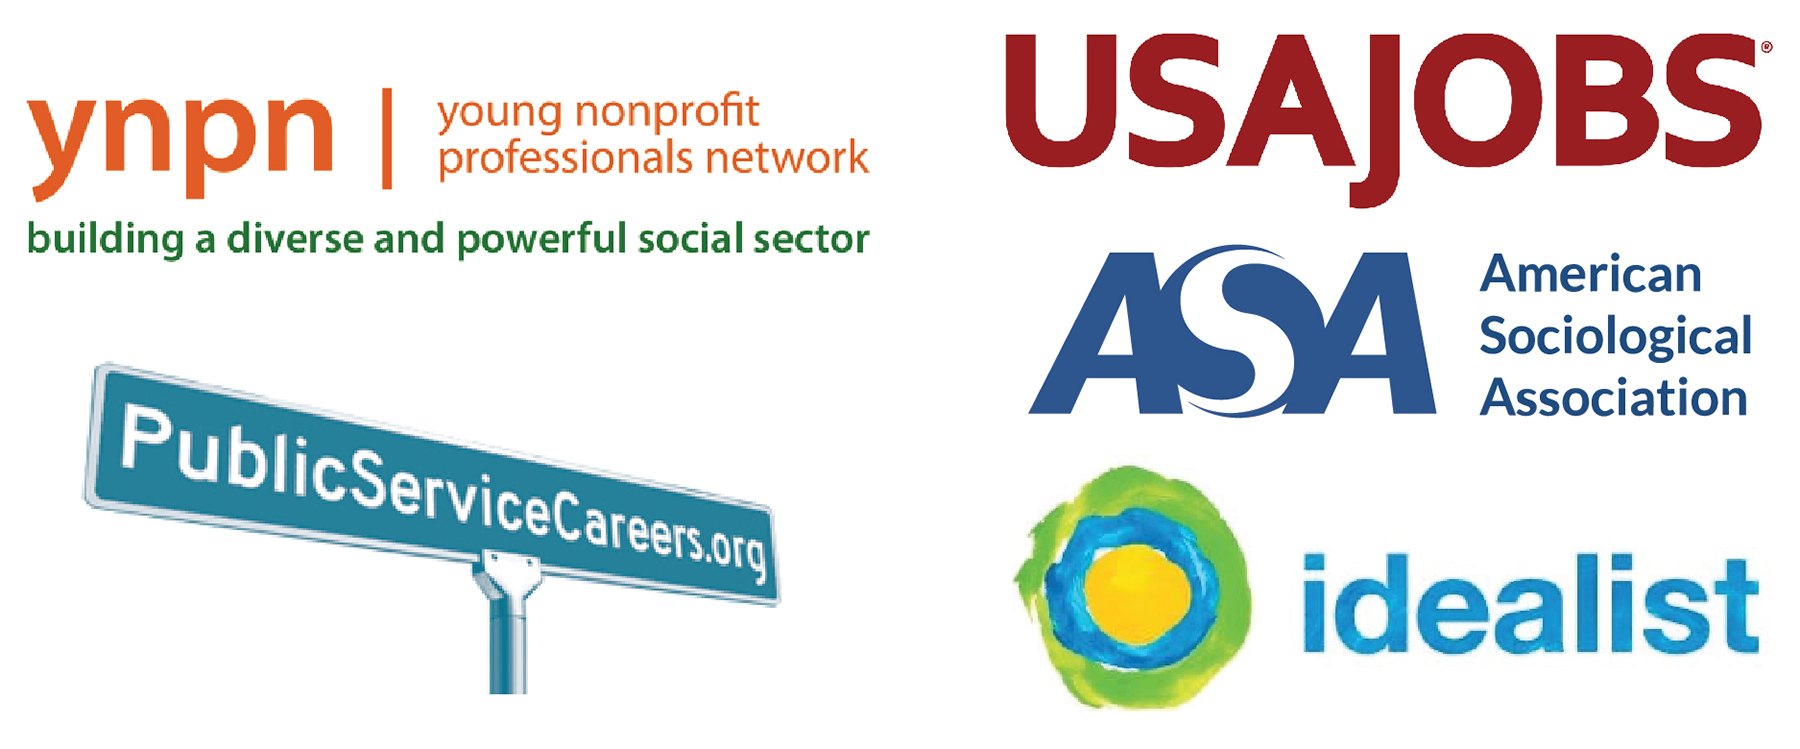 Collage of logos from job banks: Young Nonprofit Professionals Network, PublicServiceCareers.org, USAJobs, Idealist.org, and the ASA.